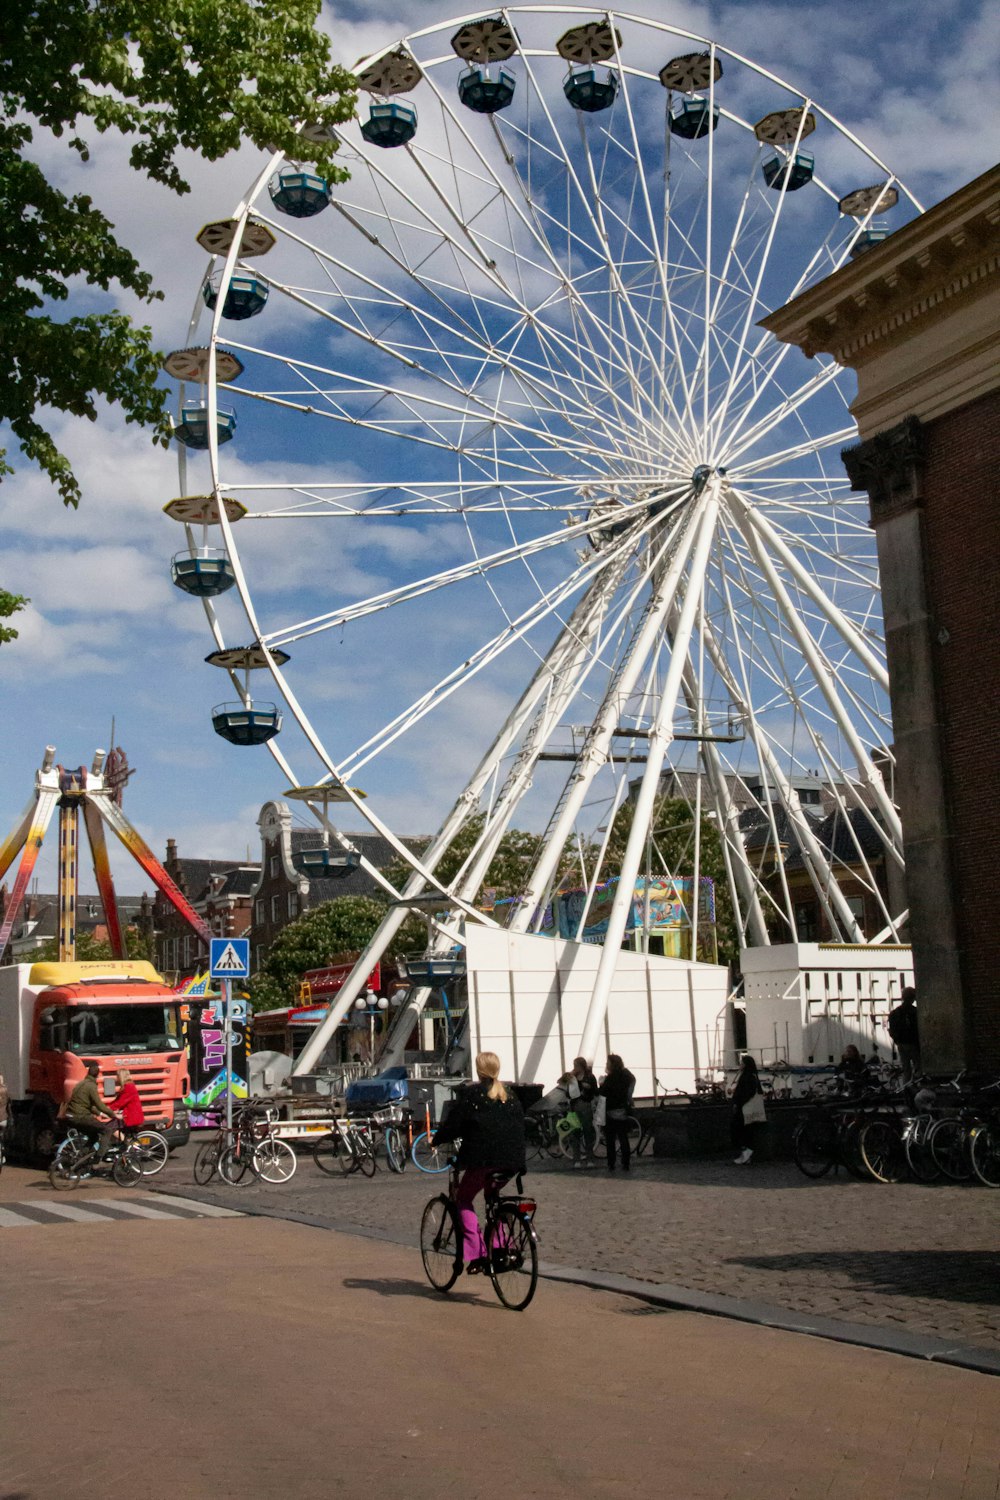 a ferris wheel with people riding bikes